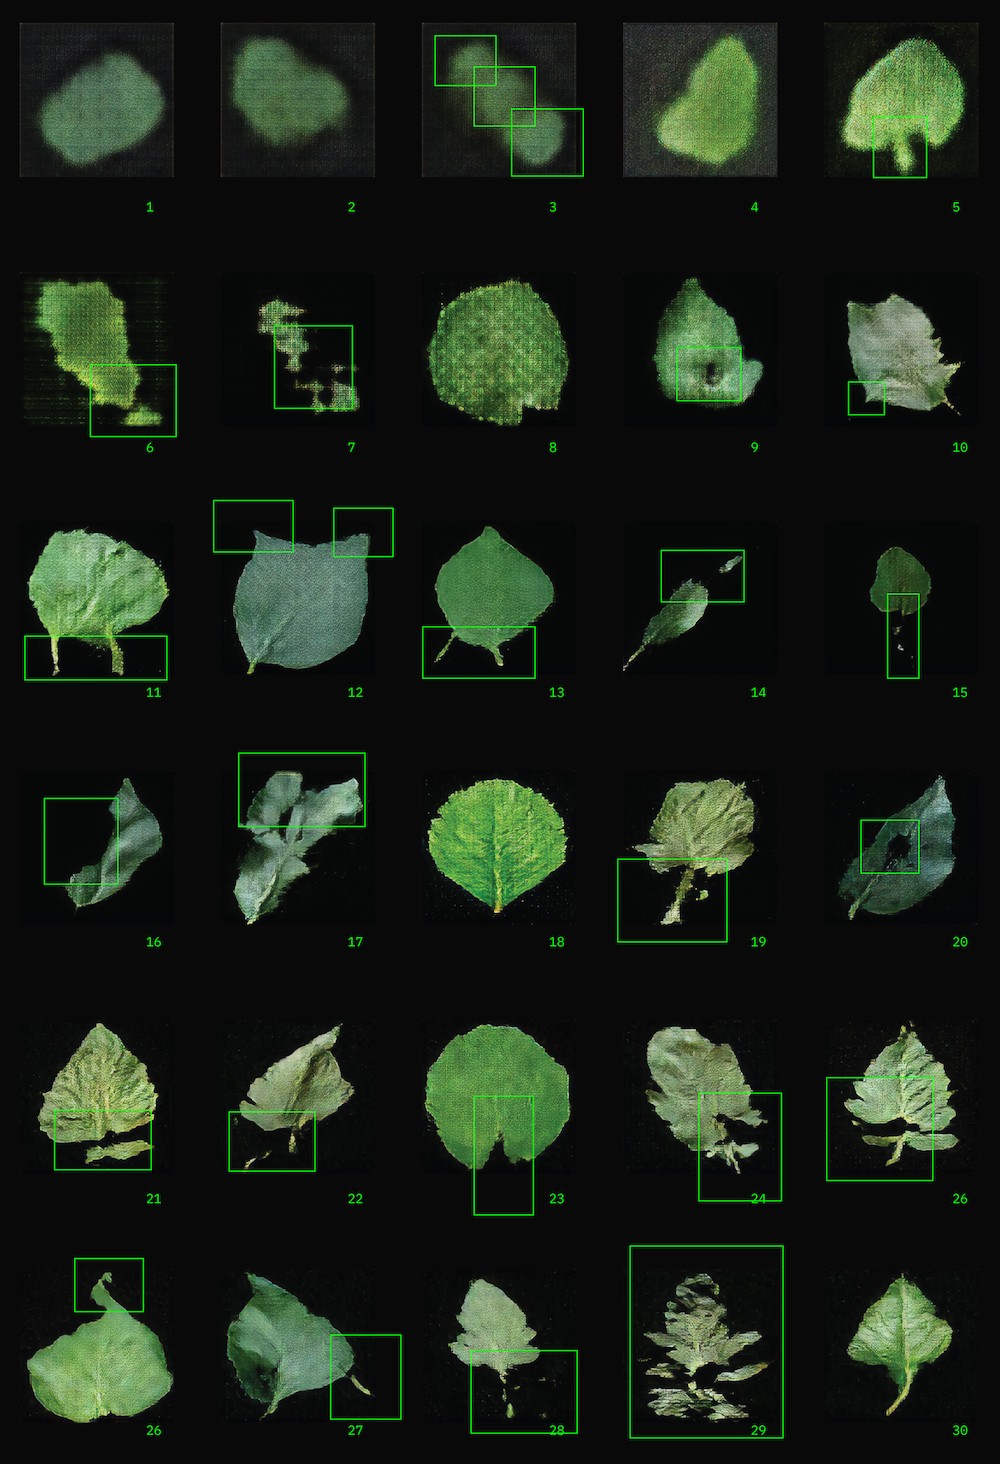 A grid of machine generated leaves. The leaves are dark green against a black background. On top of the leaves are bright neon green markings pointing out the "glitches" or flaws of each leaf.